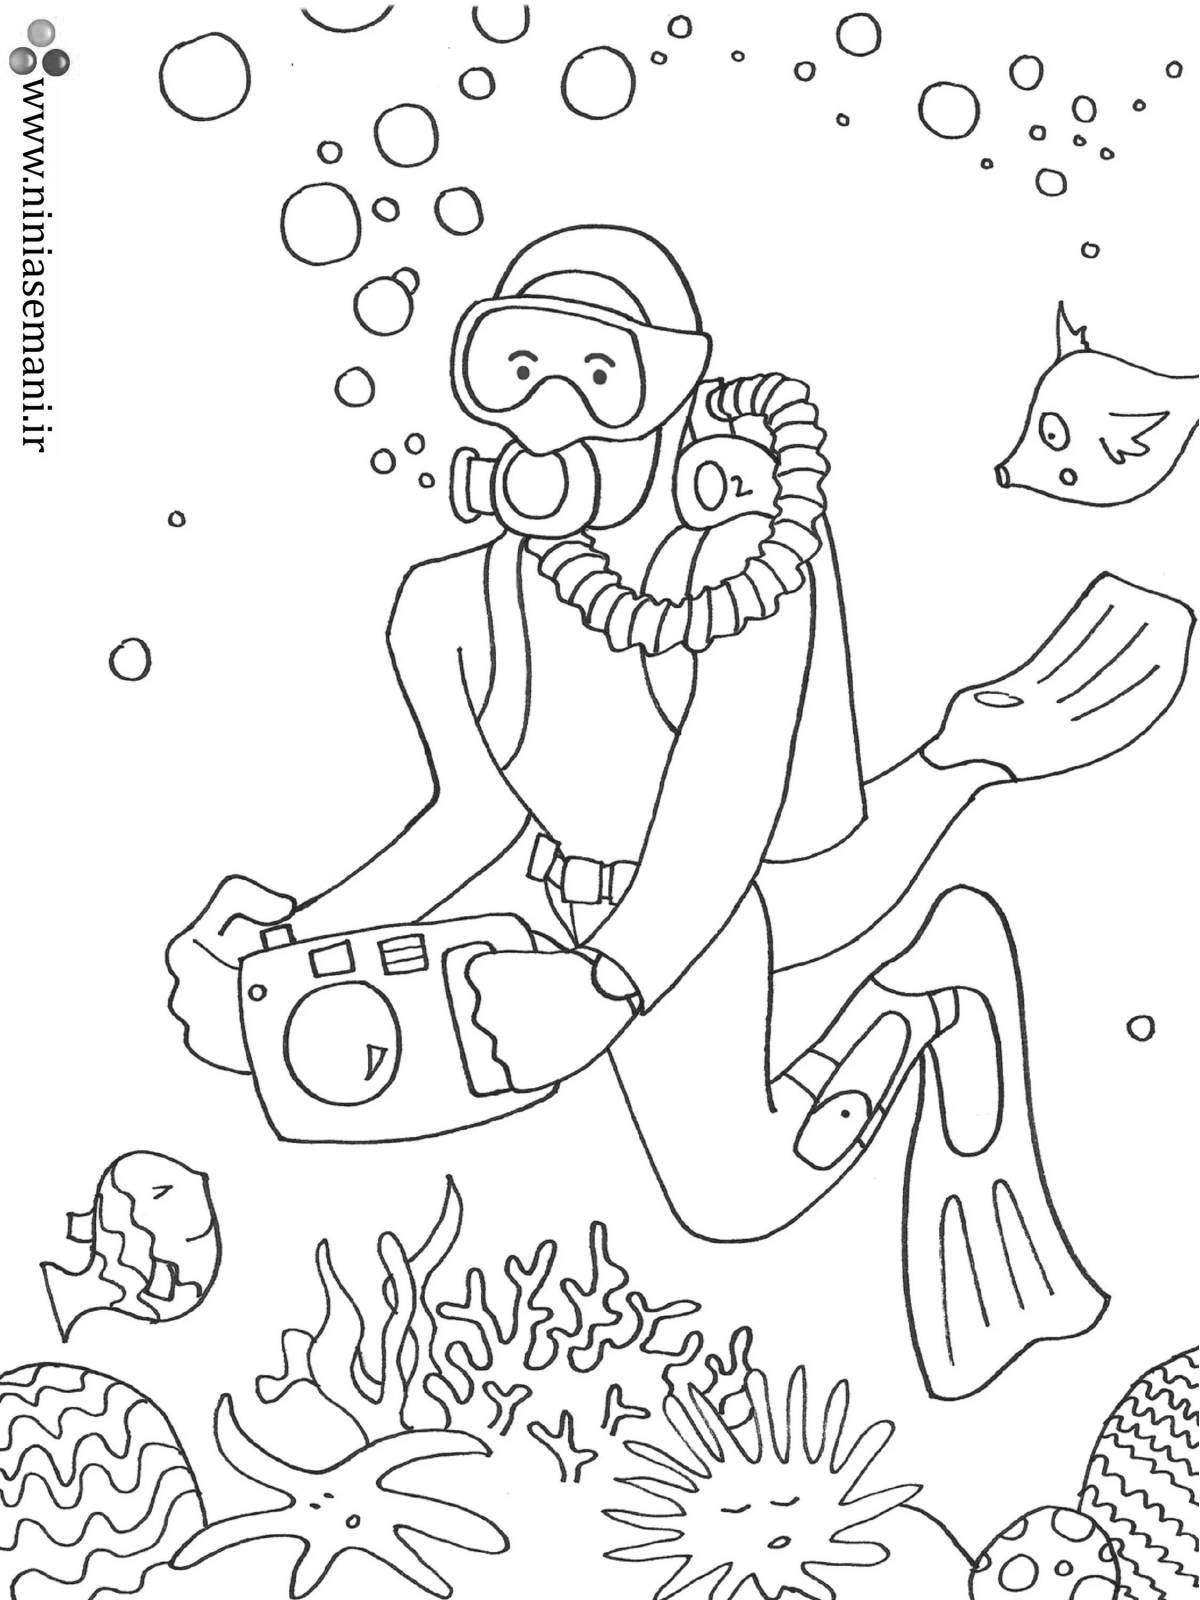 Colouring awesome diver